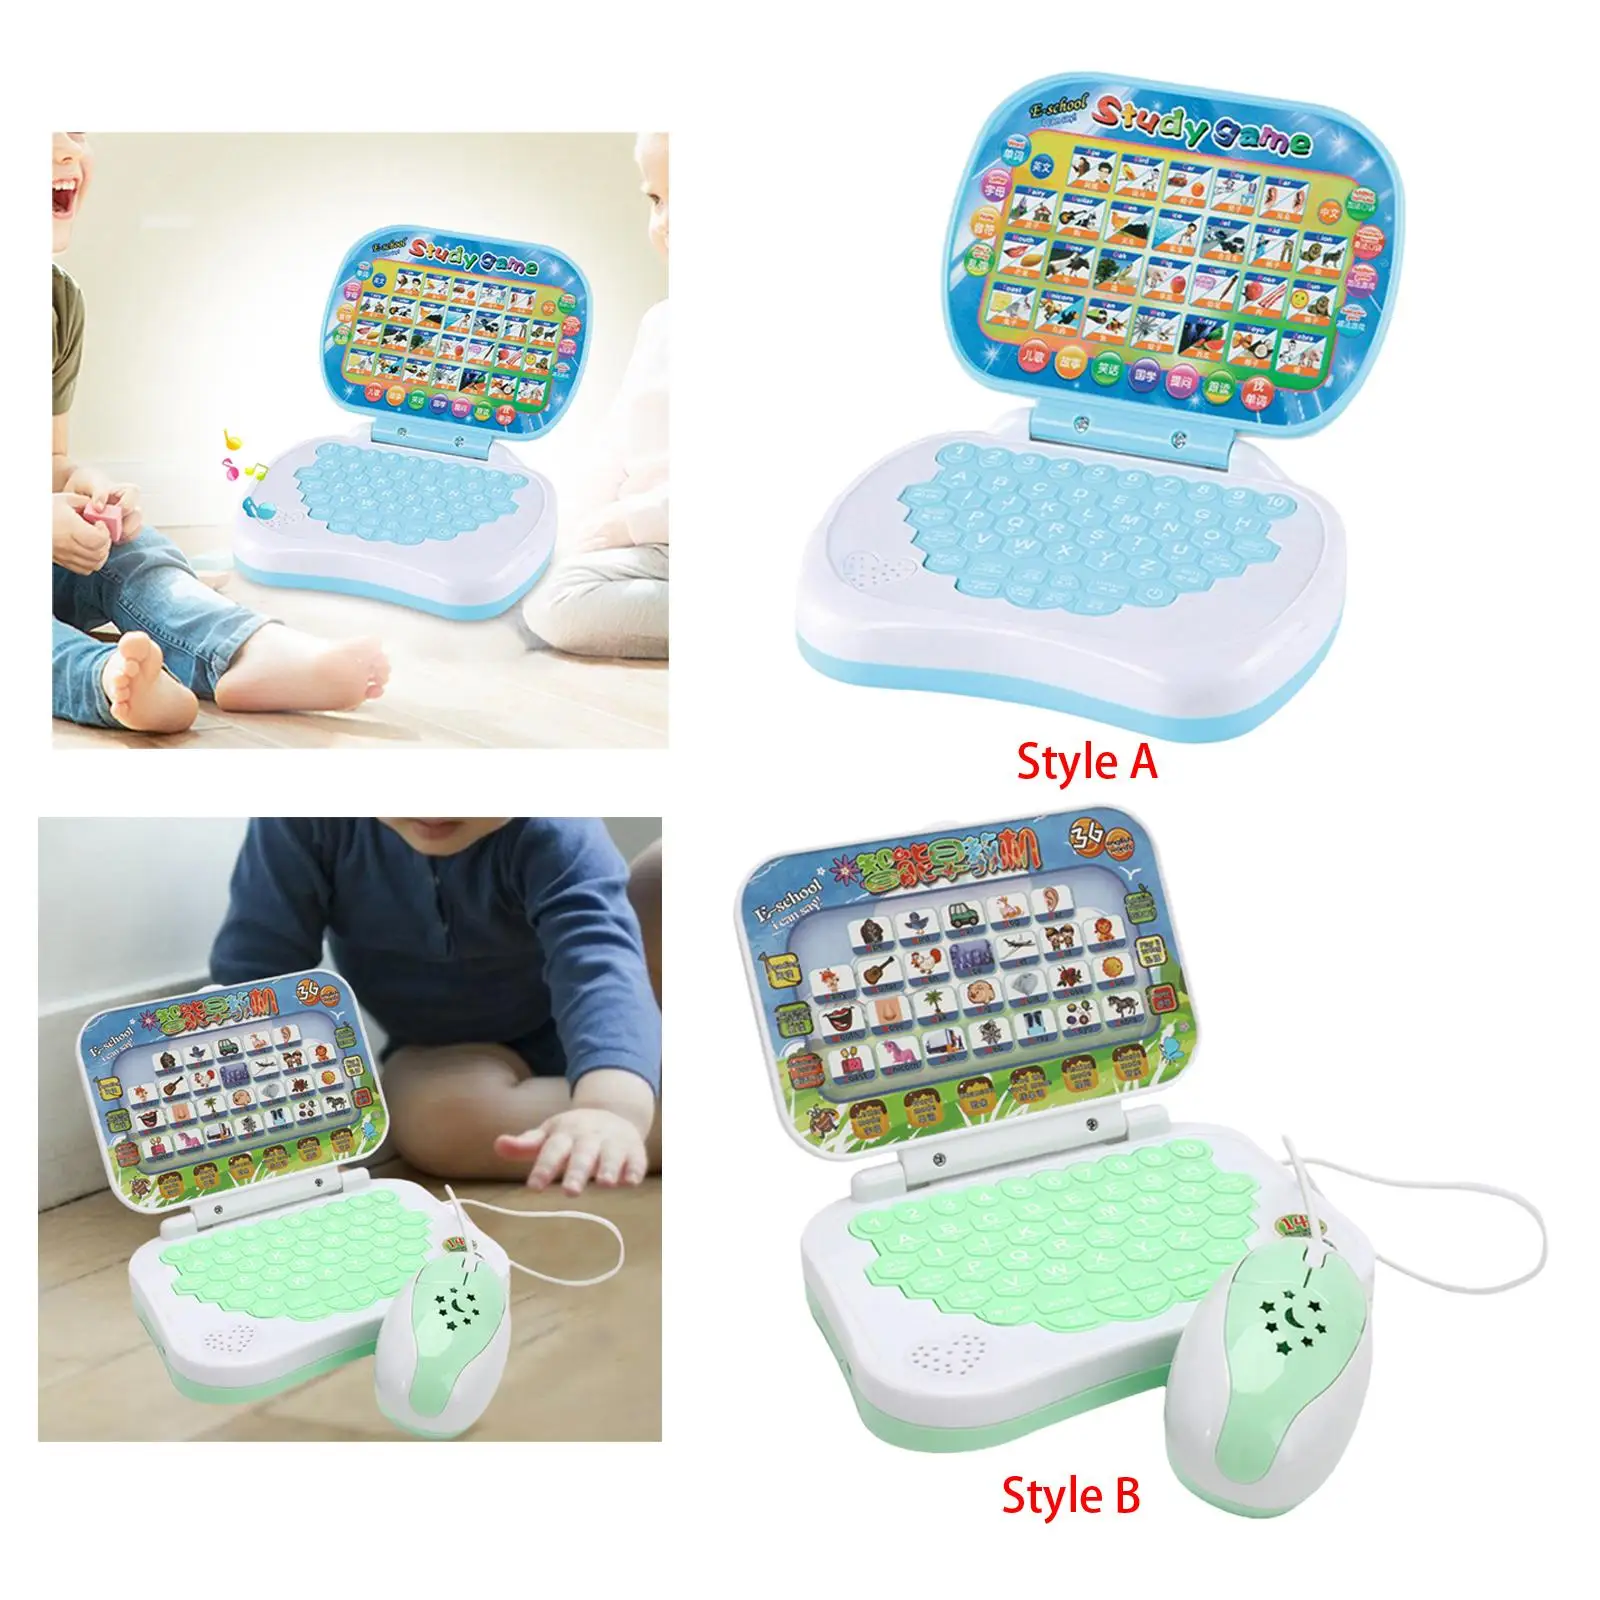 Handheld Language Learning Machine English Early Education Toy Computer Kids Laptop Toy for Children Kids Girls Boys